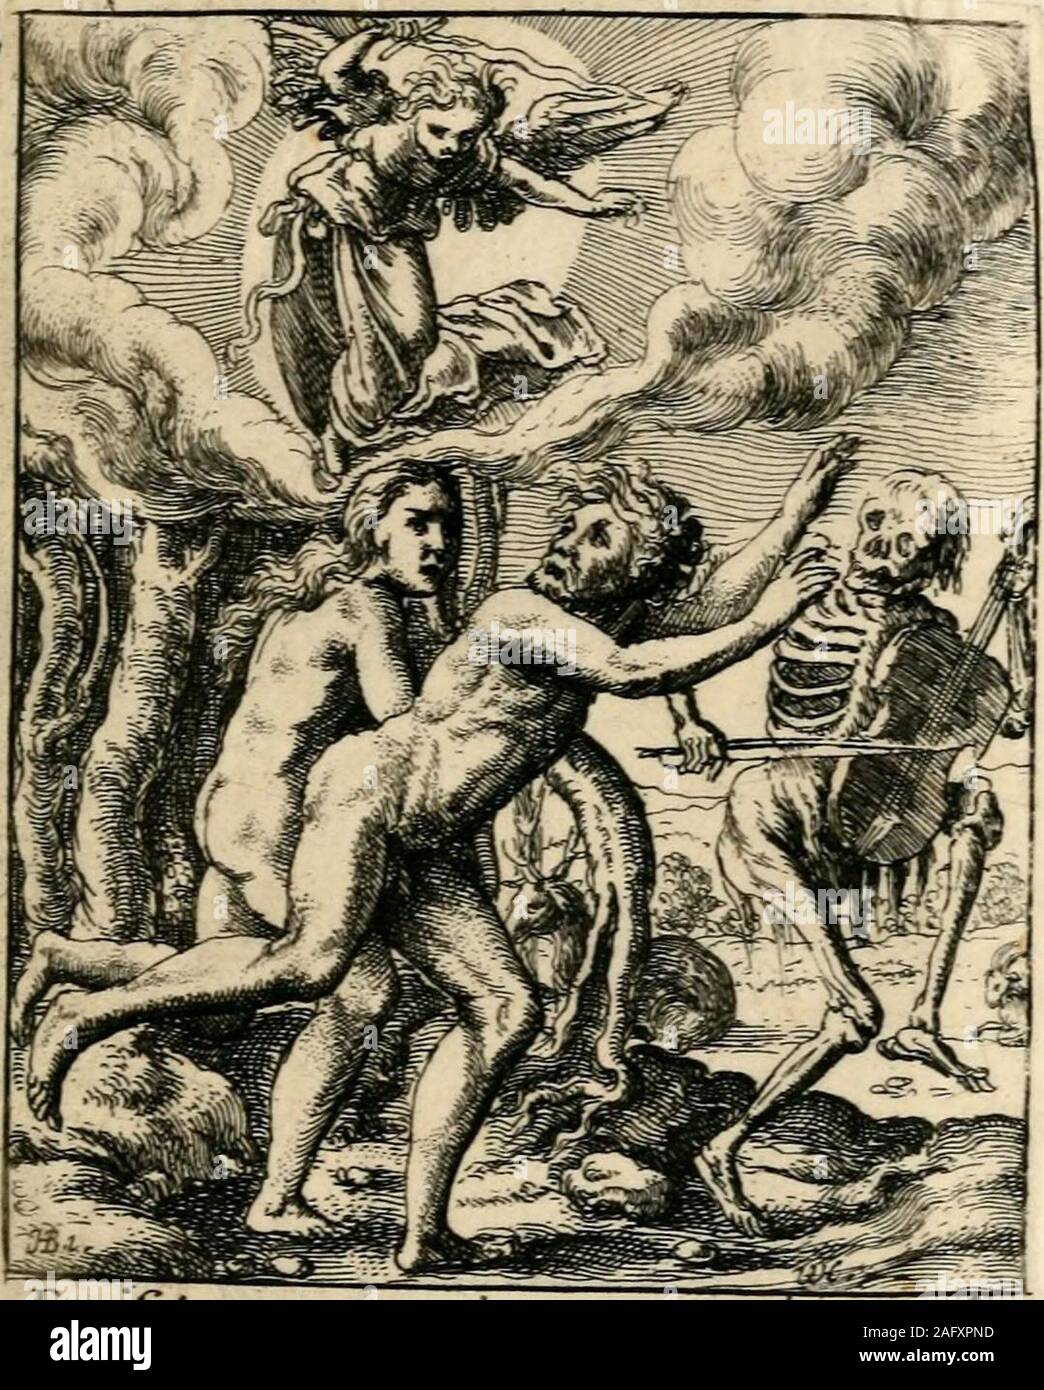 . The dance of death. ^uia^ axidjjQti voortn. vxoris tu«. & co - 43 THE TEMPTATION. II. ADAM and in Eve in Paradise. Eve, se-duced by the serpent, who in this and mostother eminent representations of the subject, isdepicted with a human face, appears to havejust tasted of the forbidden fruit, which sheholds up to Adam, and prevails on him togather another apple from th^ tree. In re-presenting this subject, it is very seldom thatartists have been correct. 44 The expulsion from PARADISE. III. ADA^I and Eve driven by the Angelfrom Paradise, are preceded by Death, whois playing on a violin, and re Stock Photo